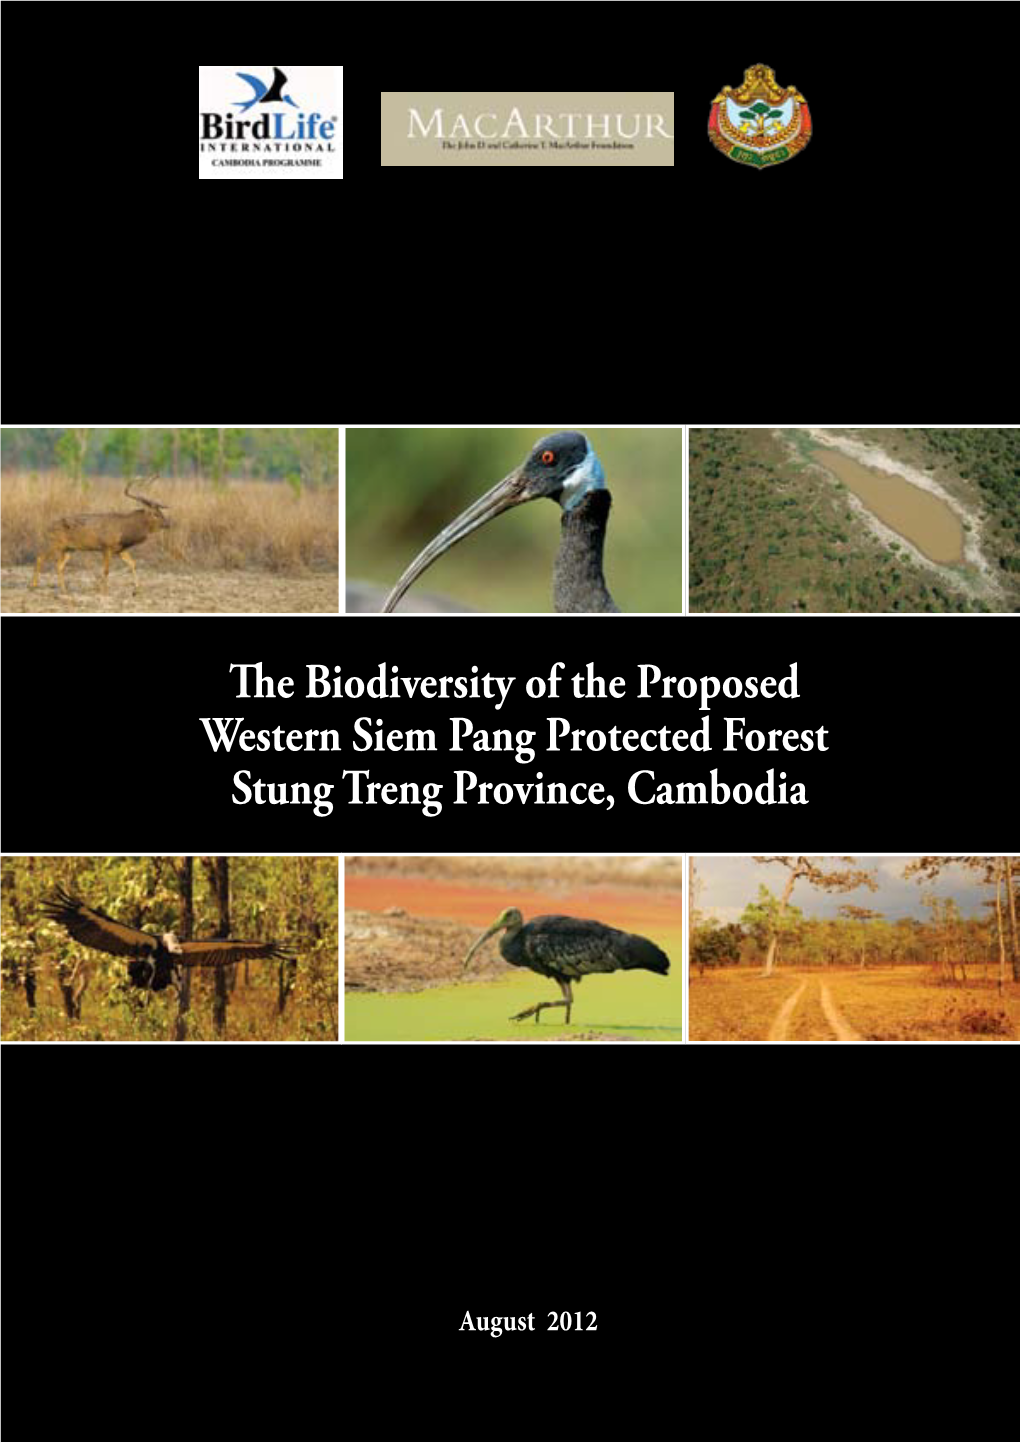 The Biodiversity of the Proposed Western Siem Pang Protected Forest Stung Treng Province, Cambodia